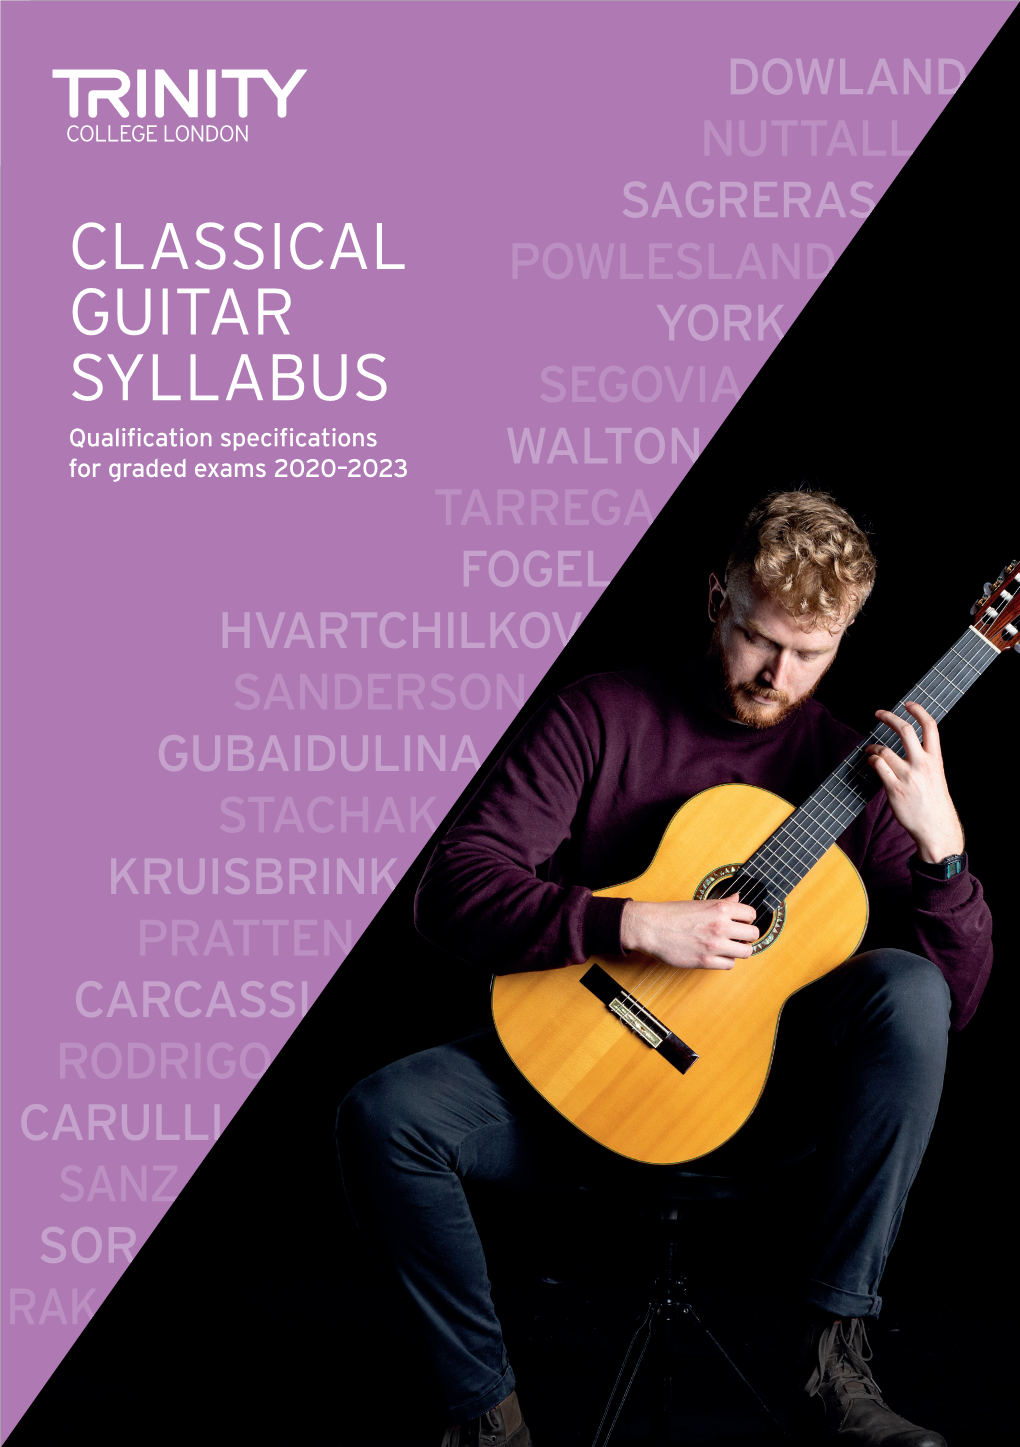 CLASSICAL GUITAR SYLLABUS Qualification Specifications for Graded Exams 2020–2023